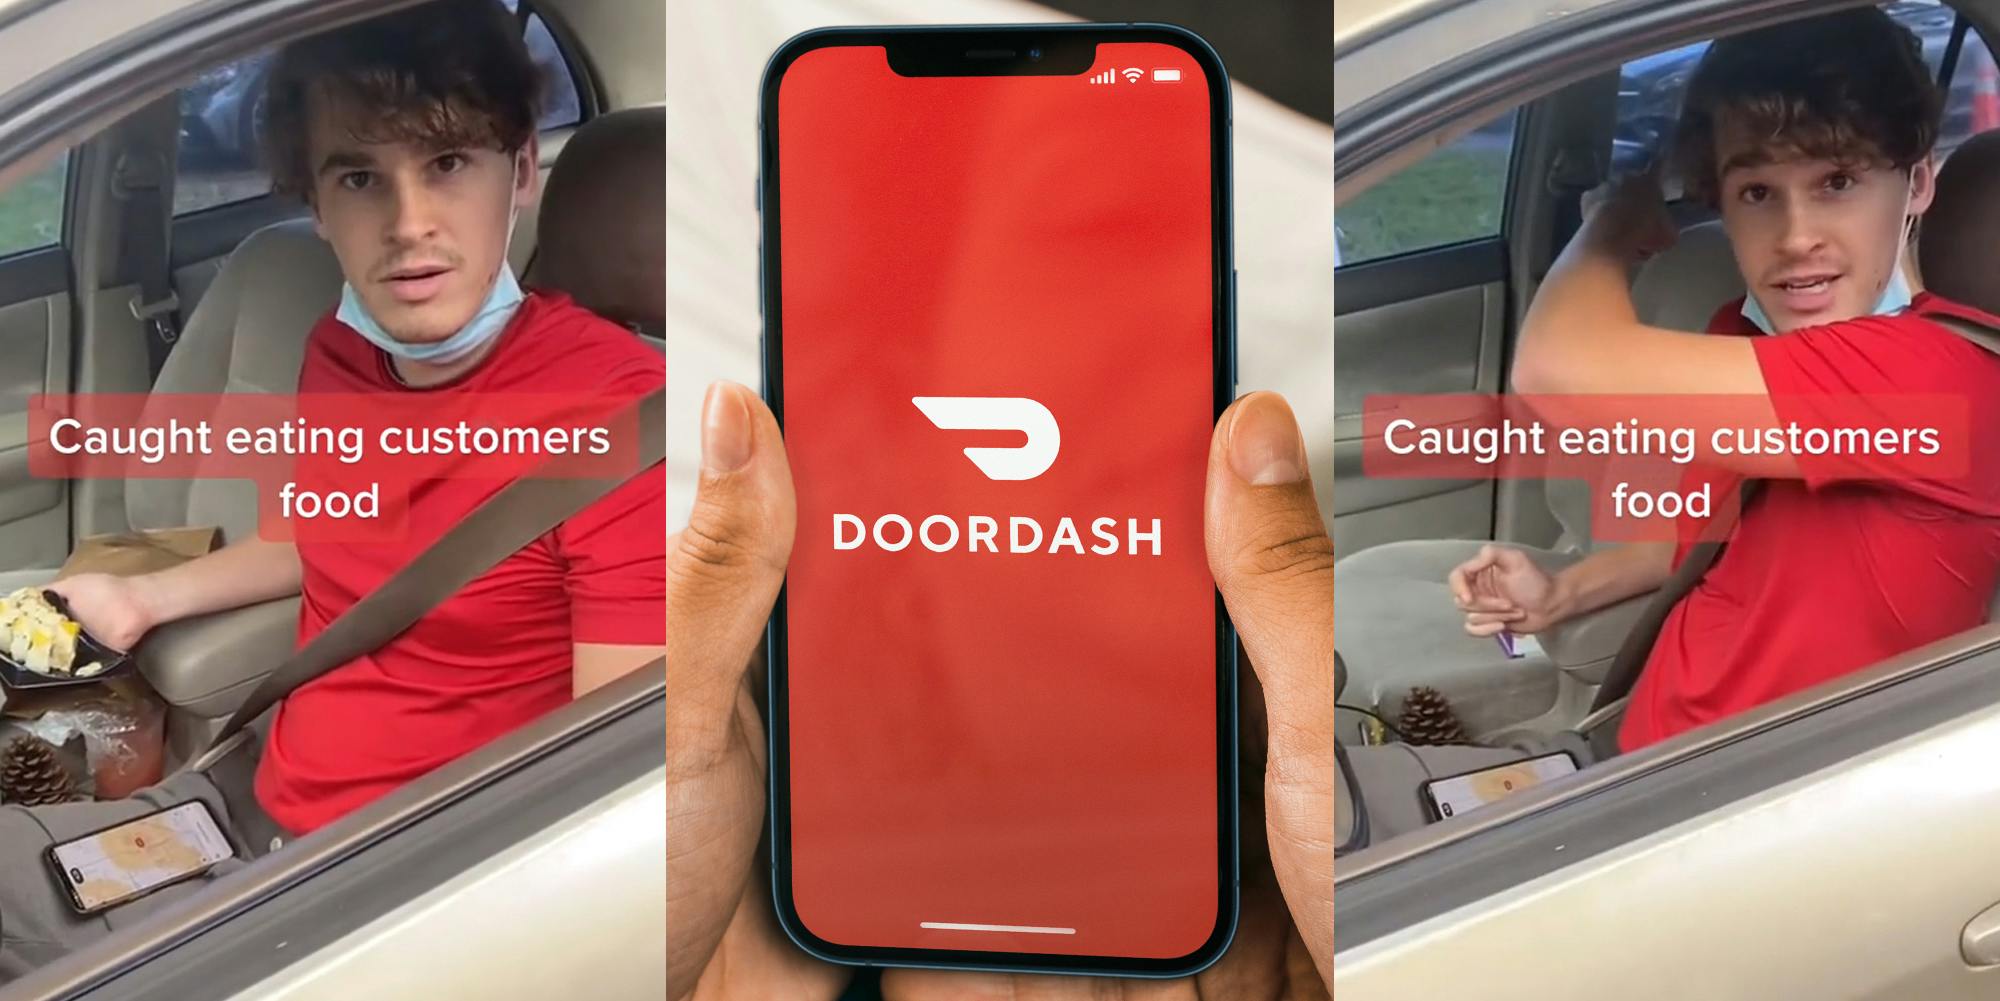 DoorDash driver eating customer food in car with caption "Caught eating customers food" (l) hands holding phone with DoorDash on screen (c) DoorDash driver speaking in car with caption "Caught eating customers food" (r)